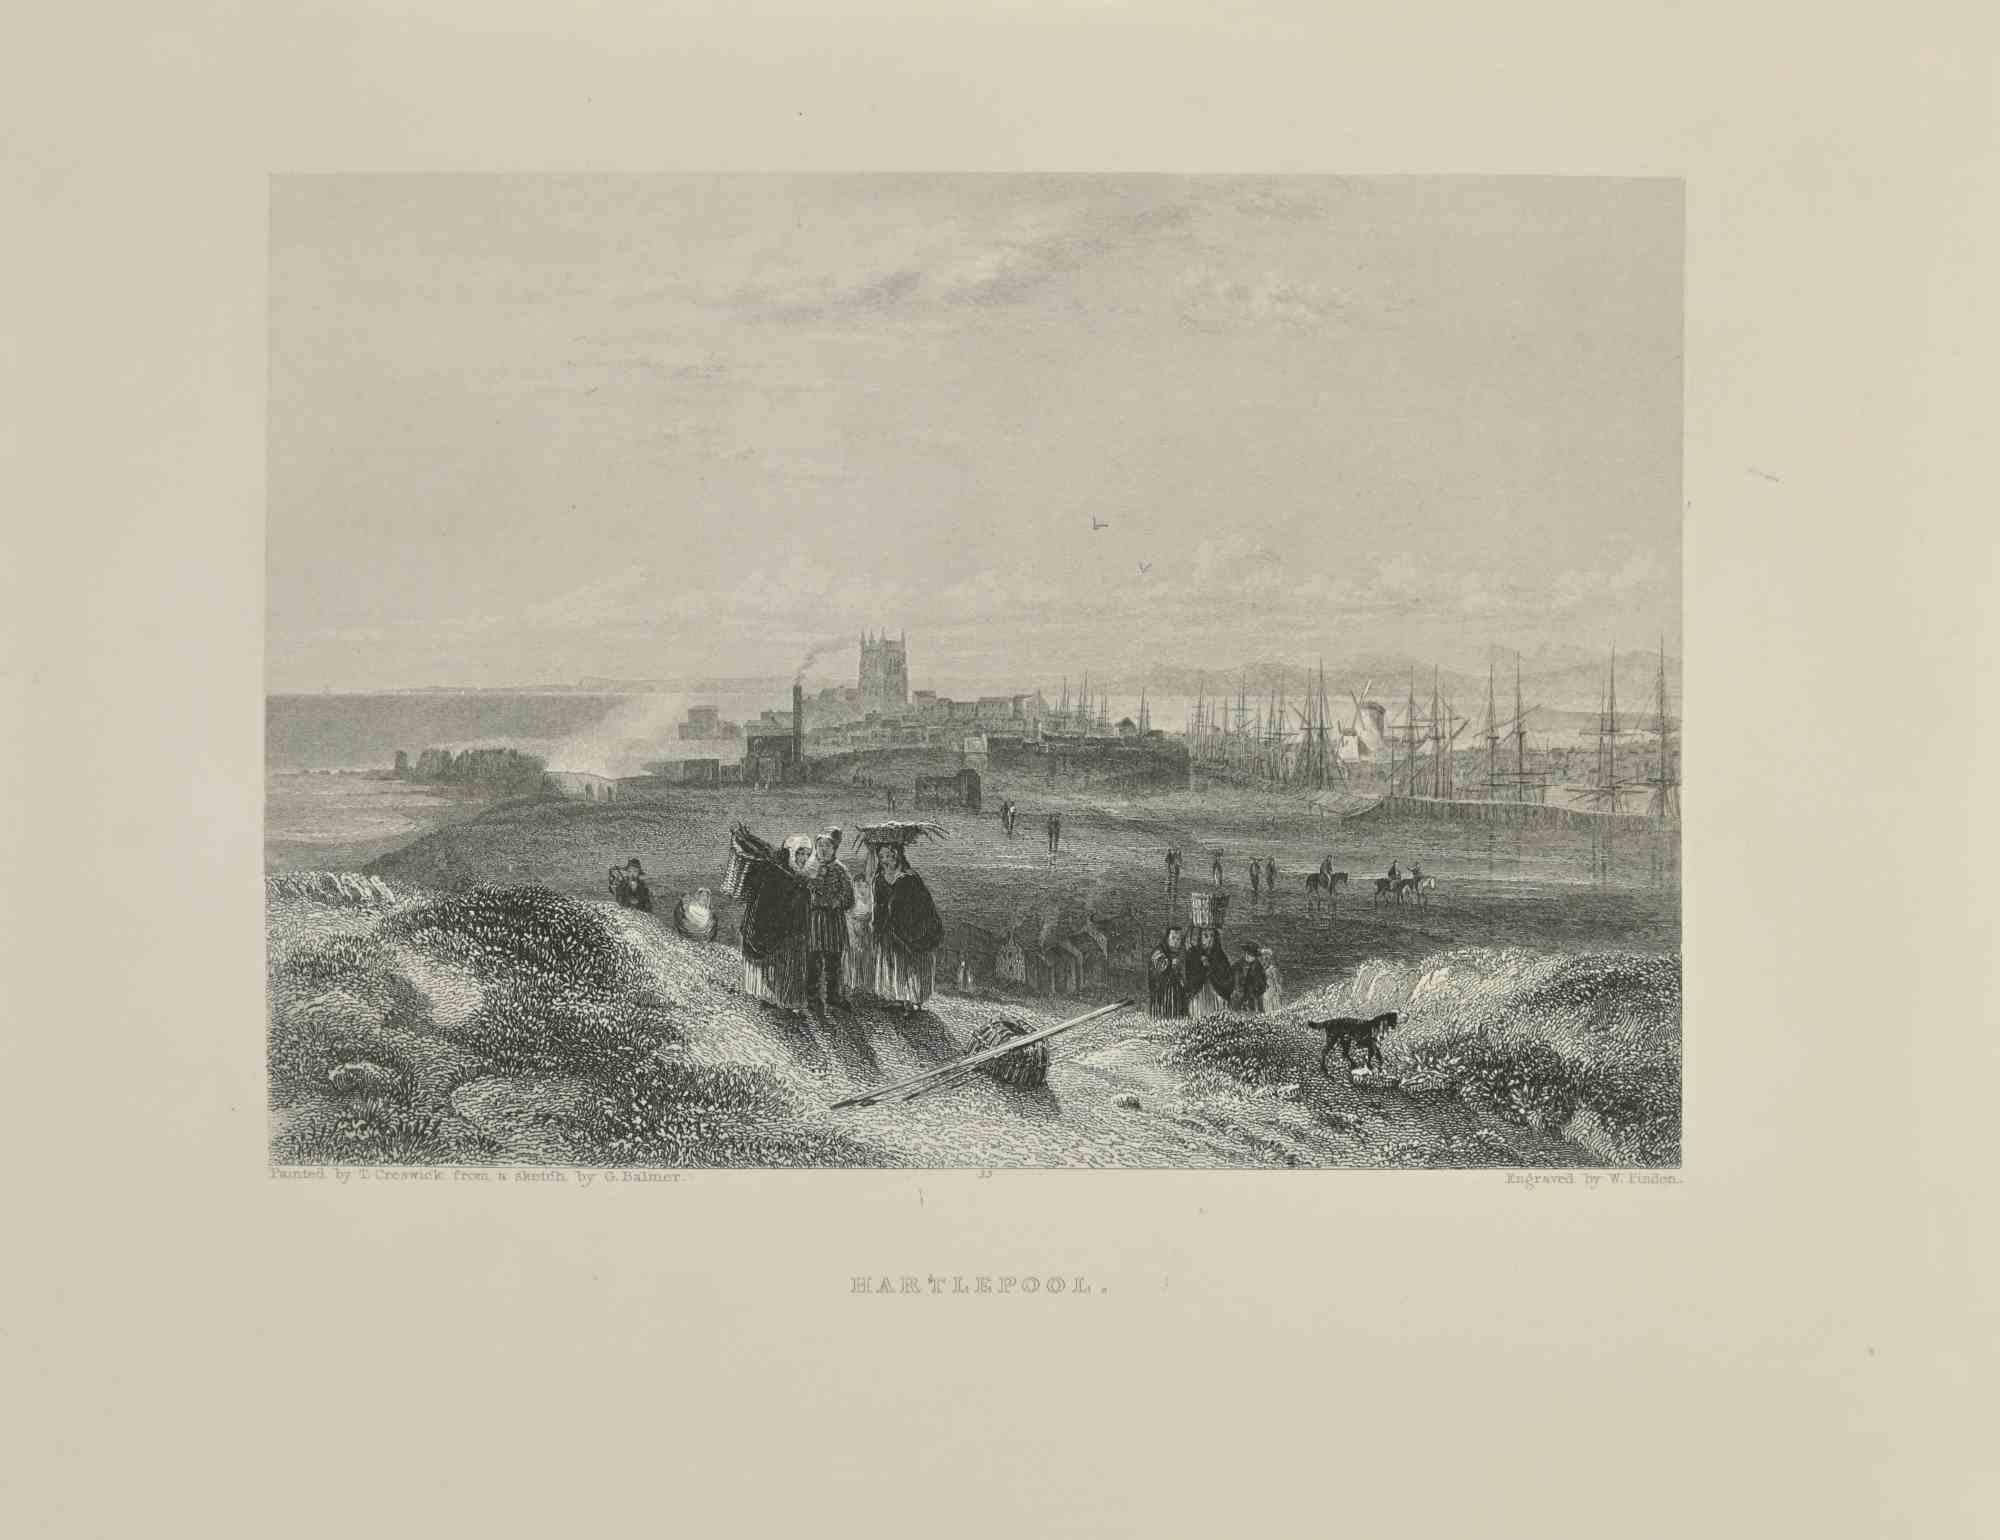 Martlepool is an etching realized in 1845 by W.Finden.

Signed in plate.

The artwork is realized in a well-balanced composition.